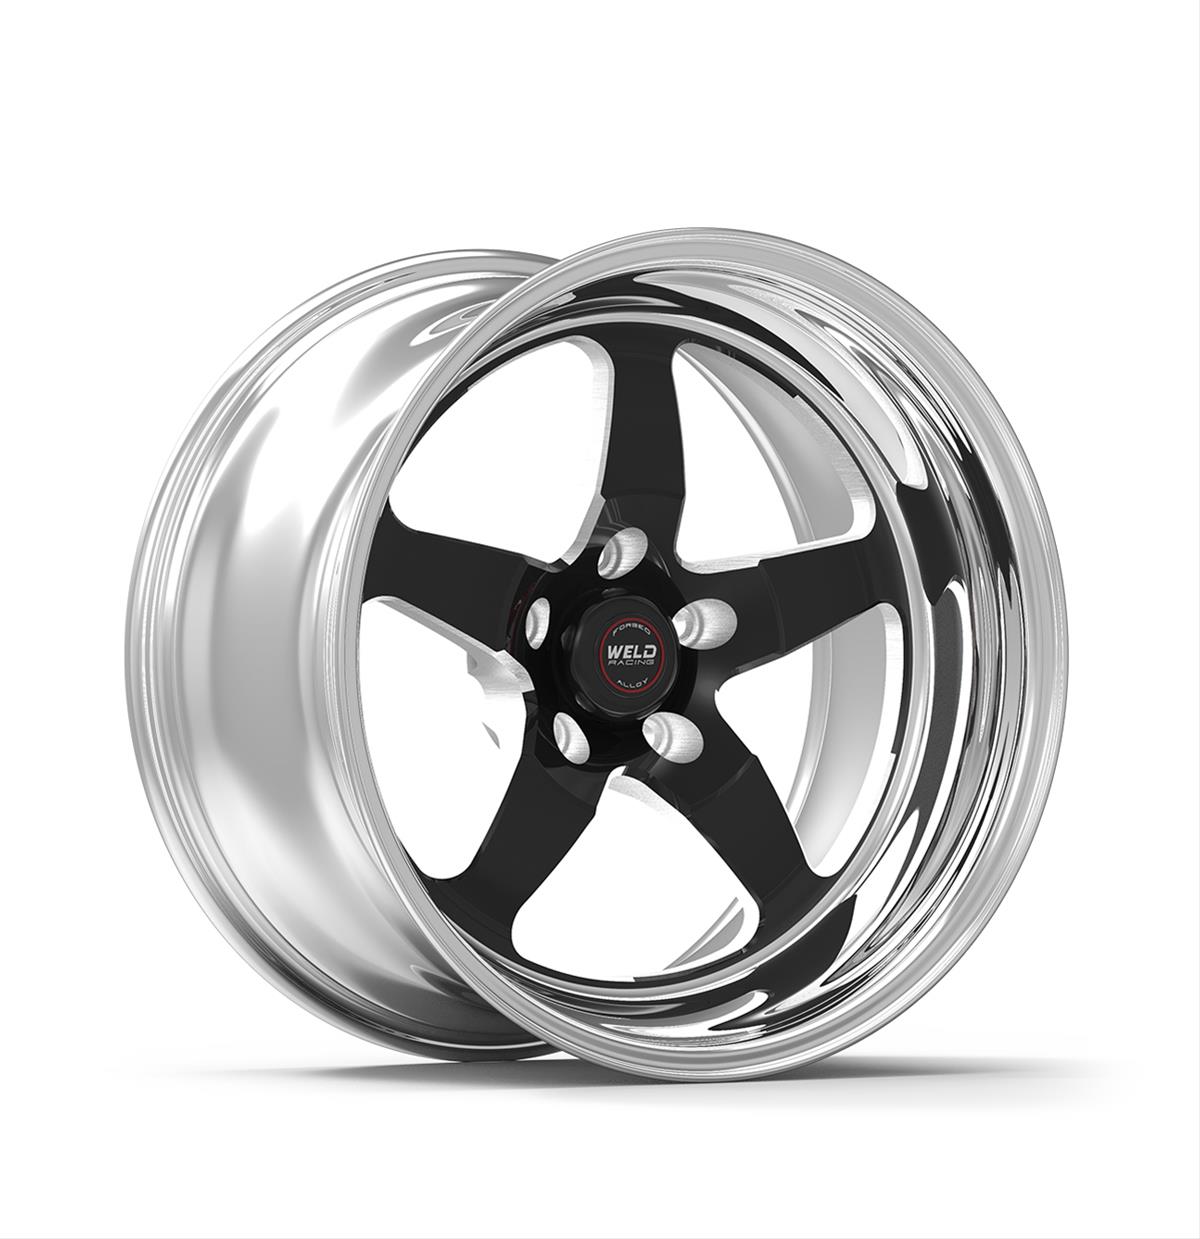 Weld Racing RT-S S71 Forged Aluminum Black Anodized Wheels 71HB8110A67A